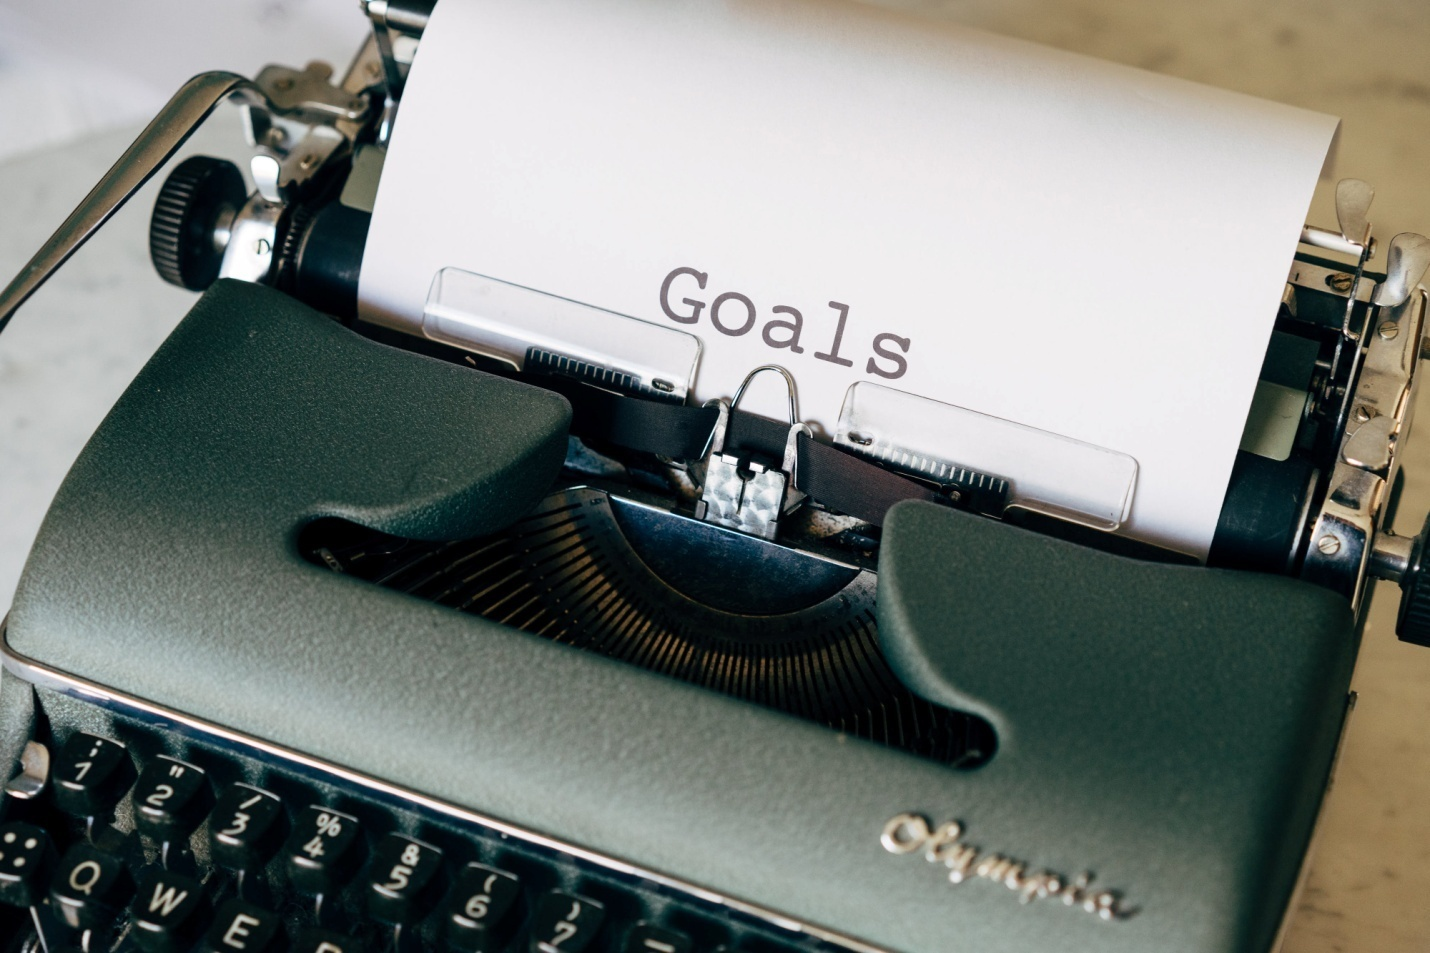 The word 'goals' printed on a piece of paper